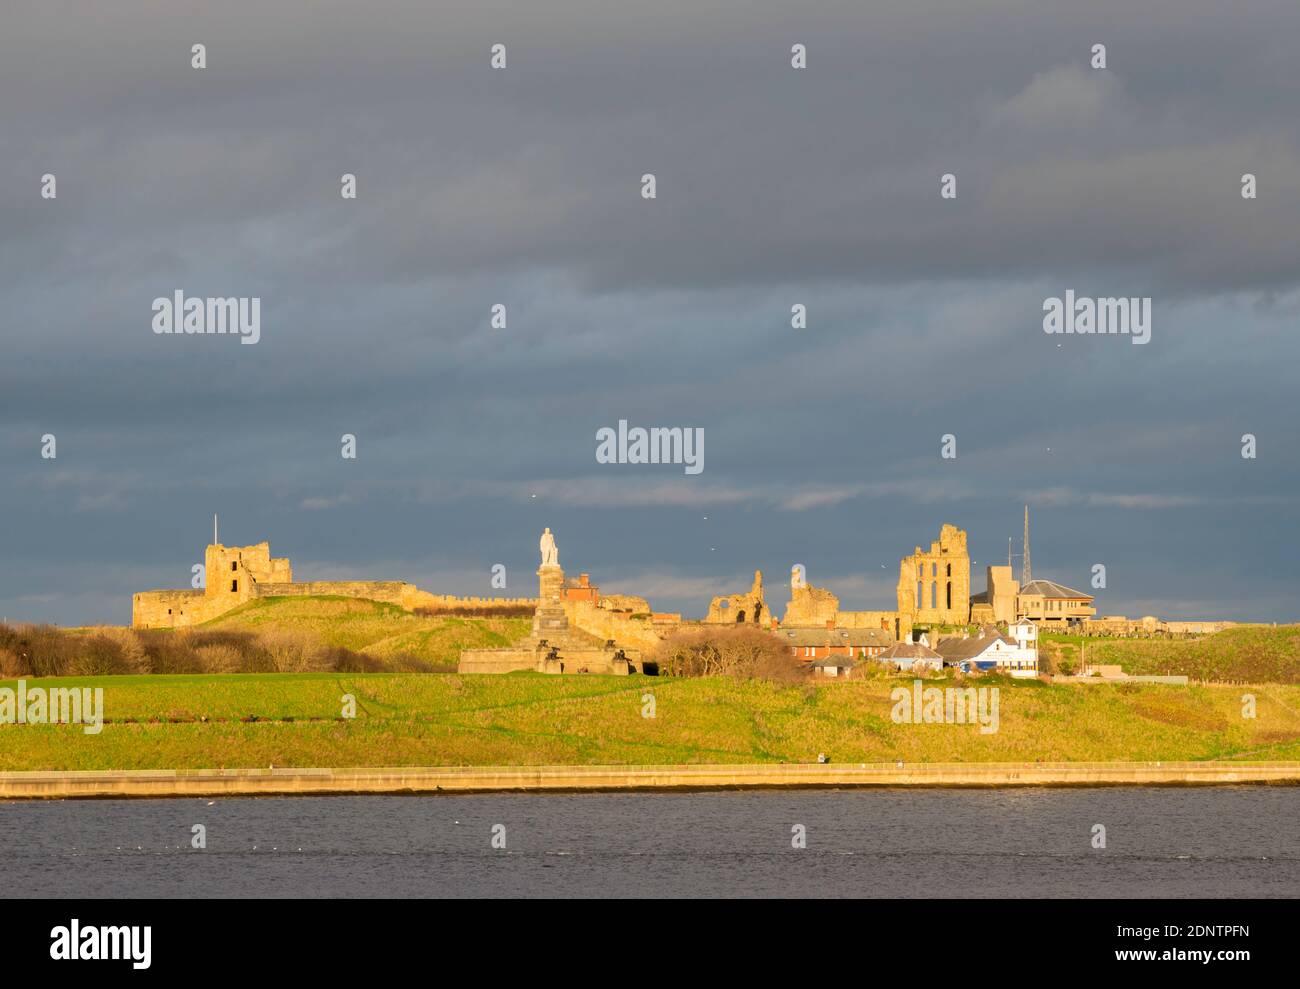 Tynemouth castle and priory buildings seen from South Shields, north east England, UK Stock Photo